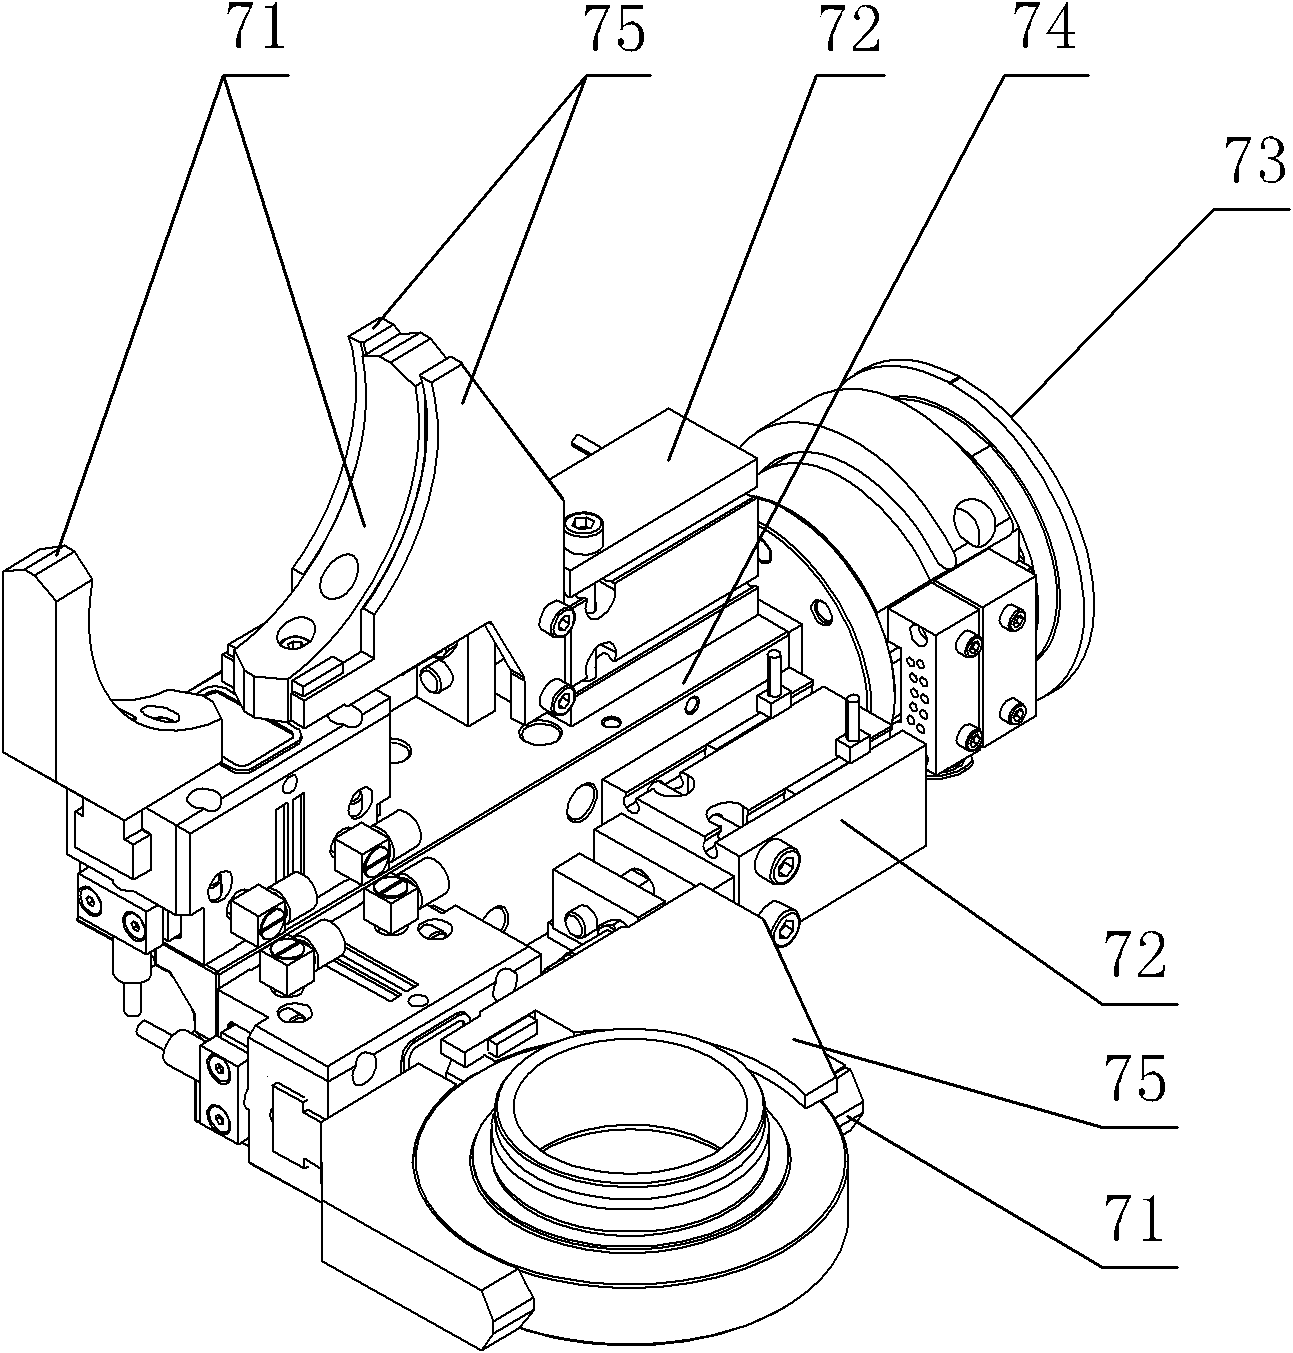 Automatic loading gear alignment method and device for articulated robot-based gear cutting machine